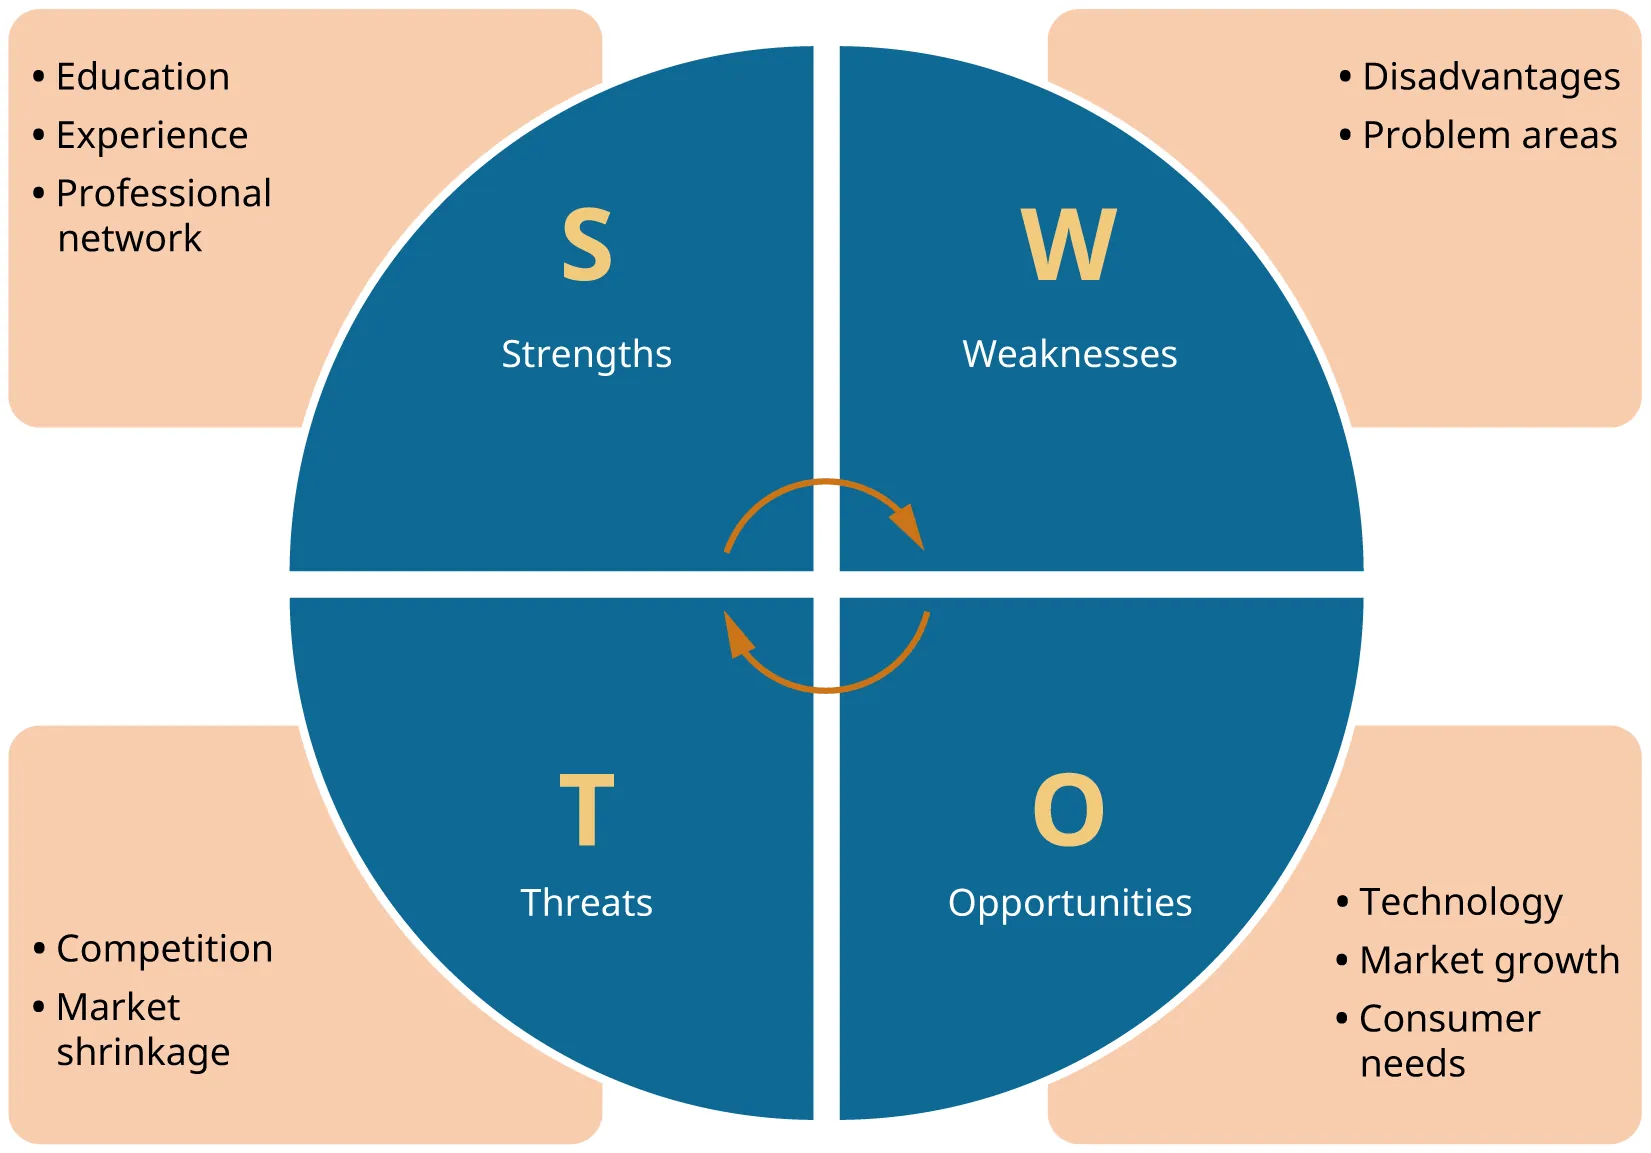 SWOT analysis involves Strengths (education, experience, and professional network), Weaknesses (disadvantages and problem areas), Opportunities (technology, market growth, and consumer needs), and Threats (competition and market shrinkage).